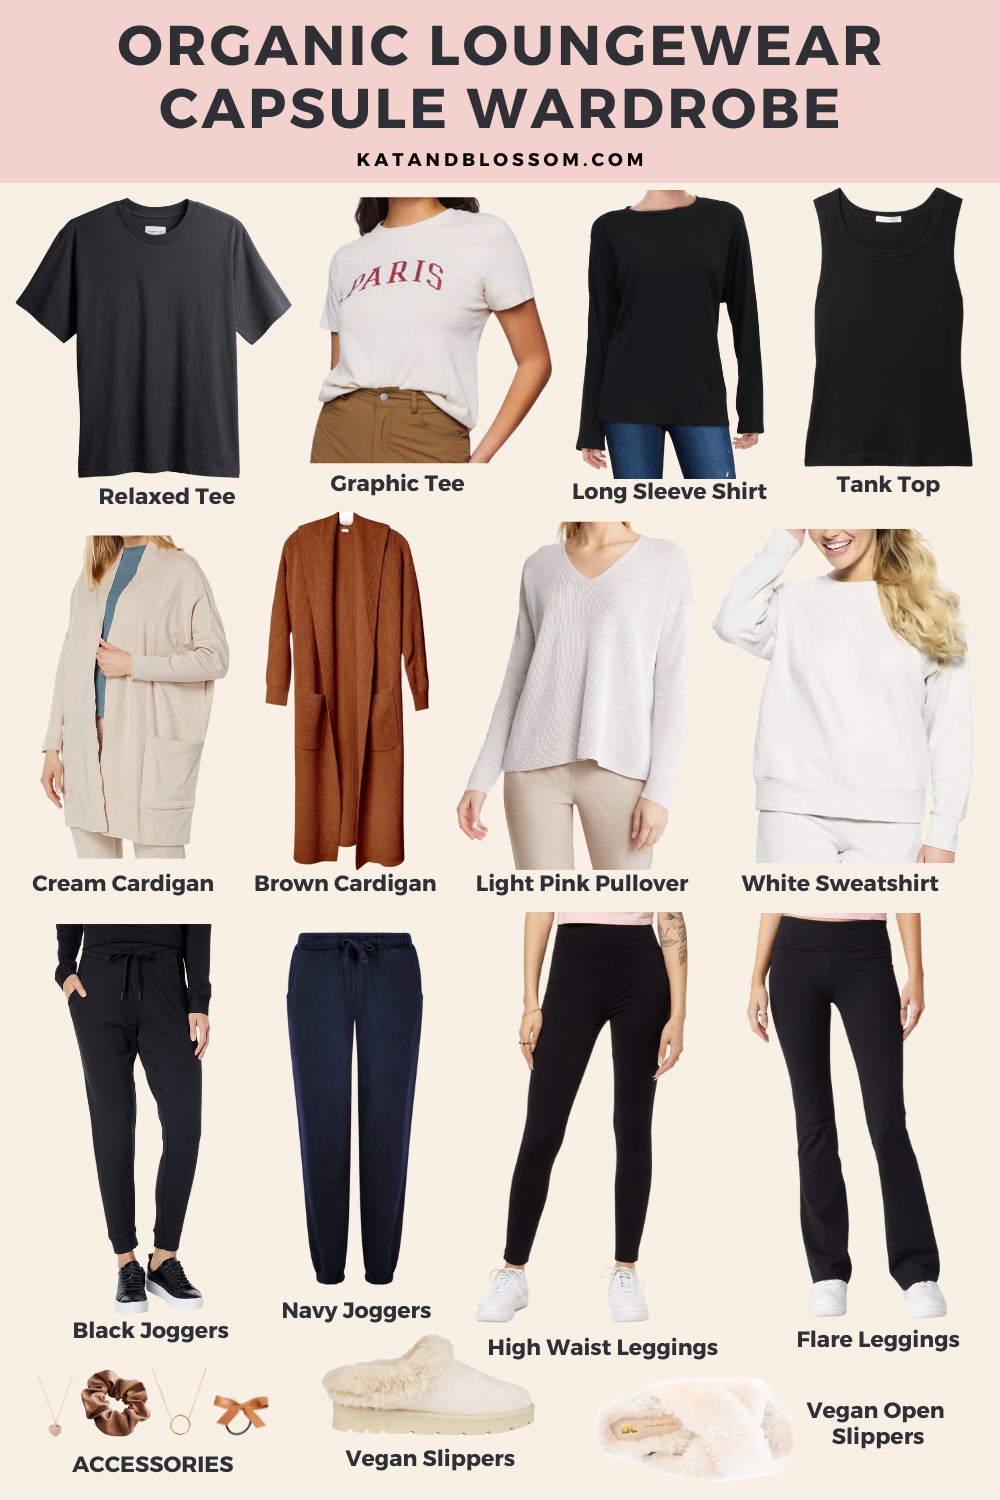 How To Create A Cozy Organic Loungewear Capsule Wardrobe - Kat and Blossom